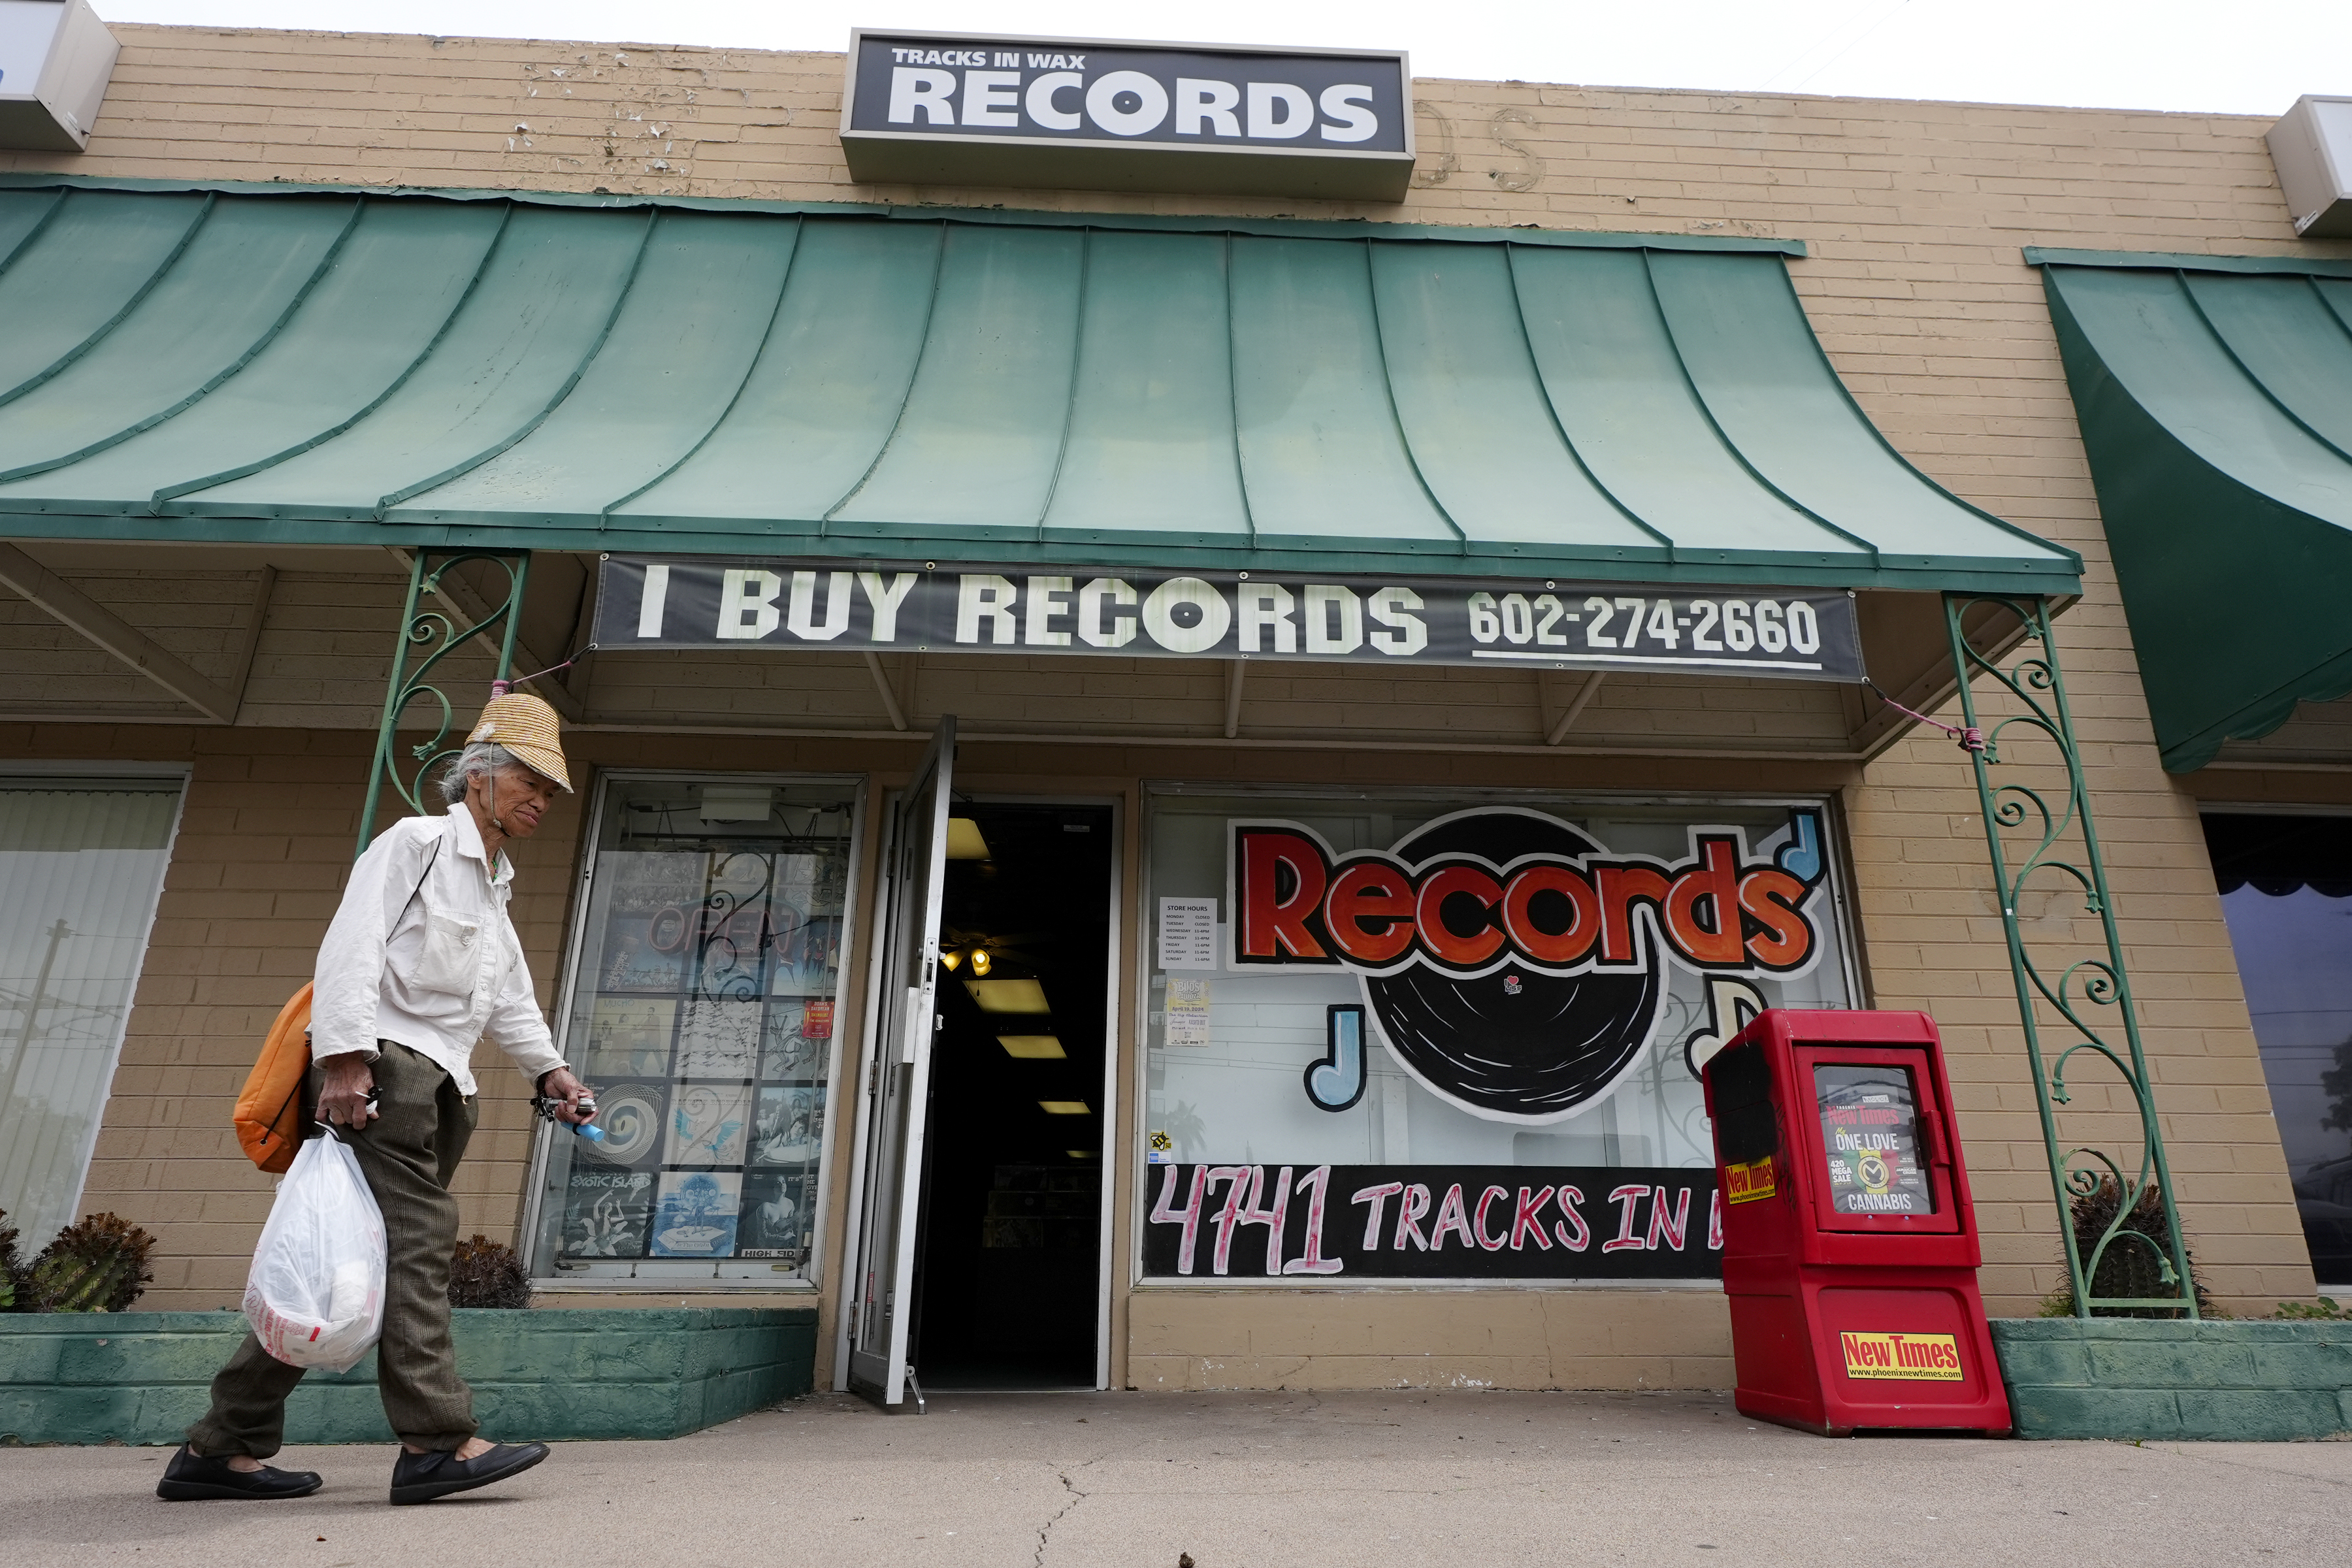 record store day celebrates indie retail music sellers as they ride vinyl's popularity wave